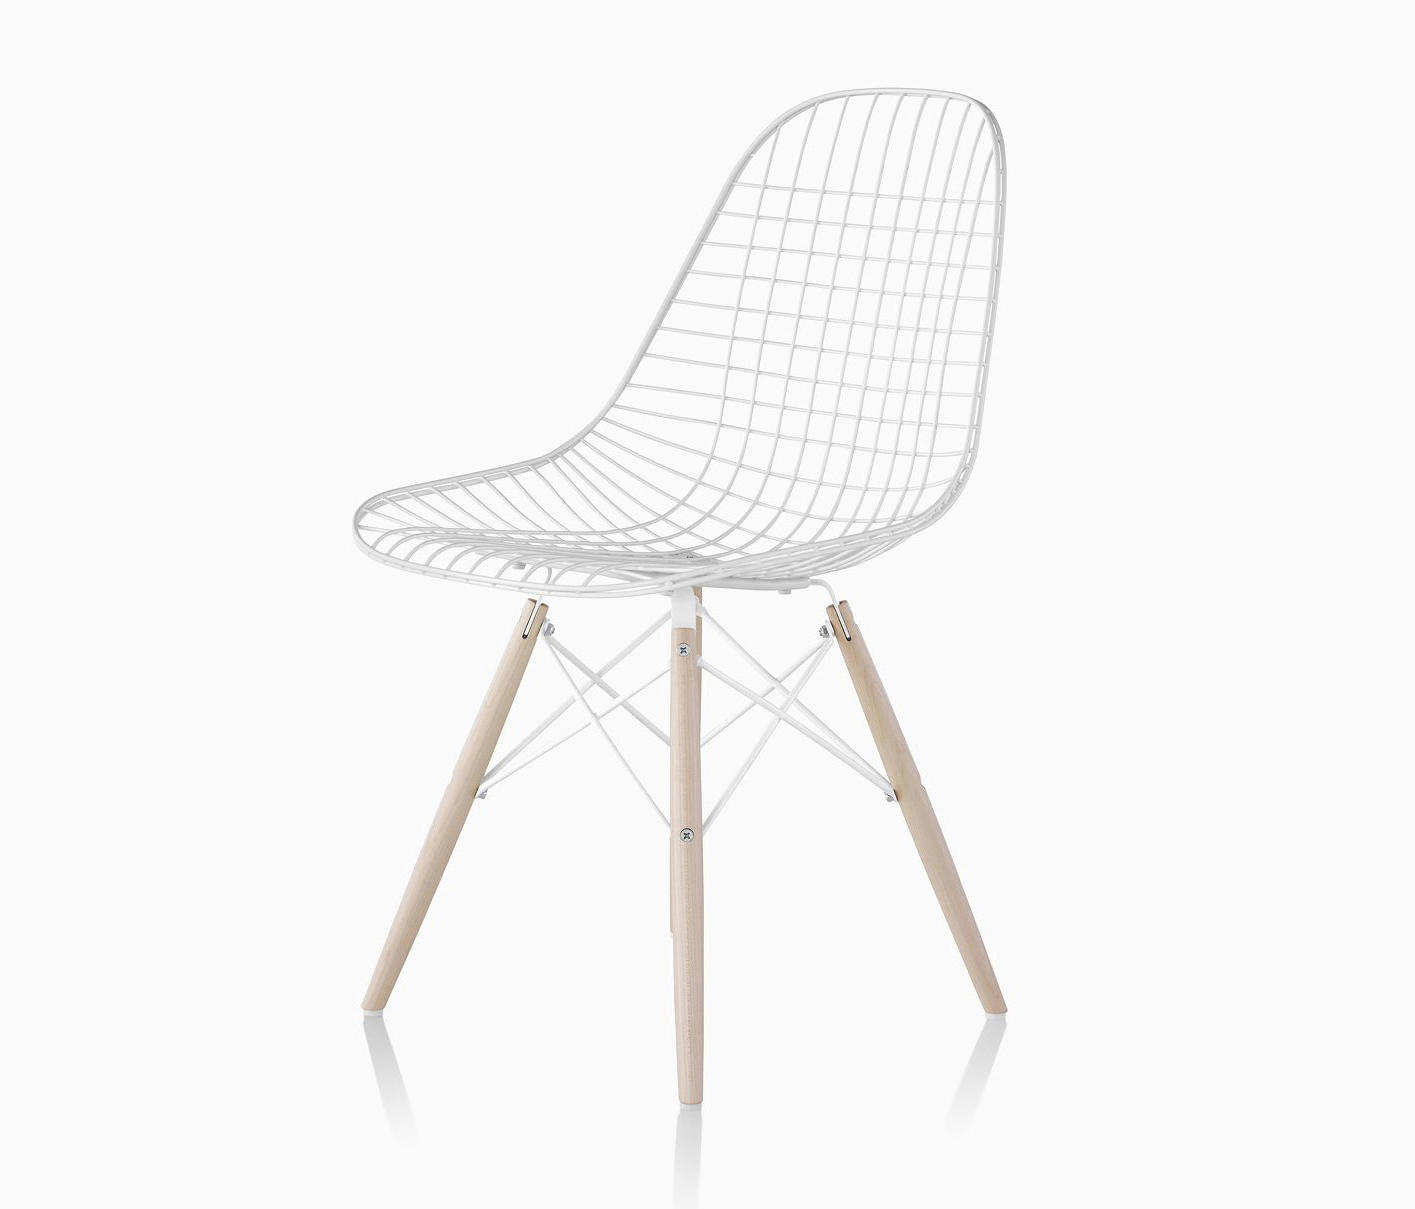 Eames Wire Chair Designer Furniture, Seat Pad For Eames Wire Chair